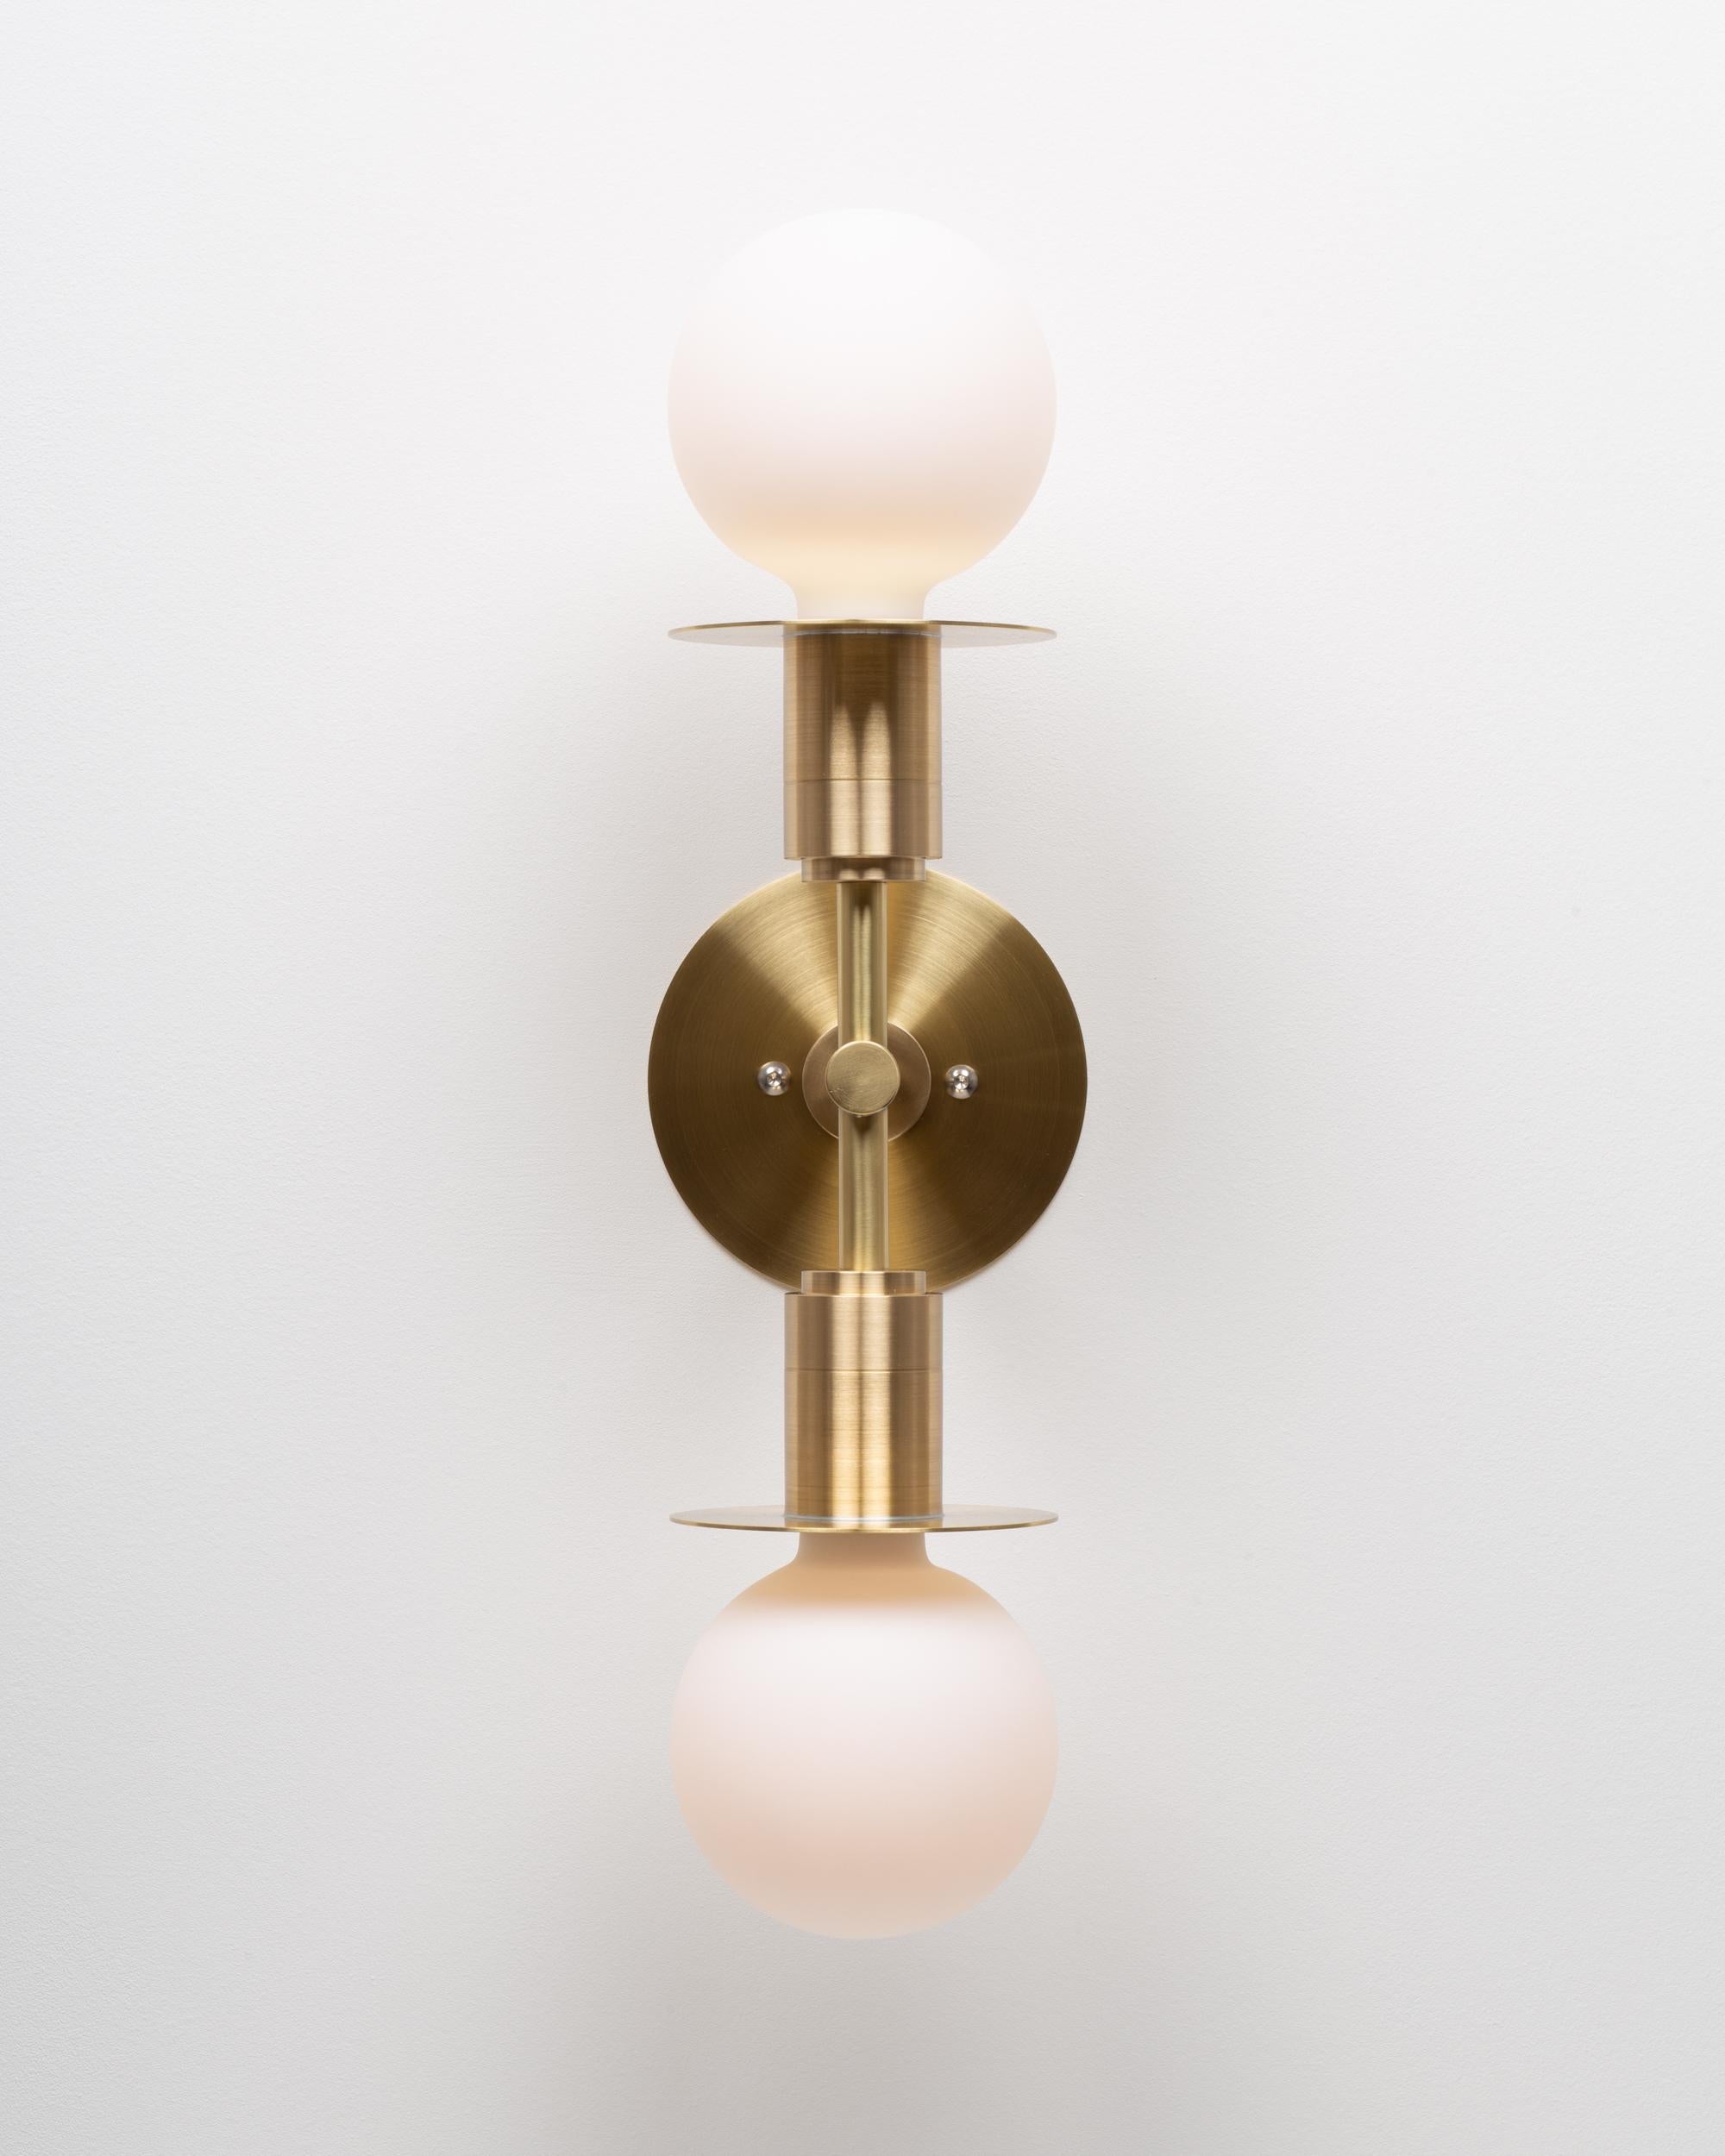 Double Sphere Disc Wall Light 
Brushed brass wall plate
2000K - 2800K  95CRI
1200 Dim to Warm Lumens 
Flush mount Hard Wired
Sphere III Bulbs Included
Handmade in Hackney Wick, by Lights of London.
